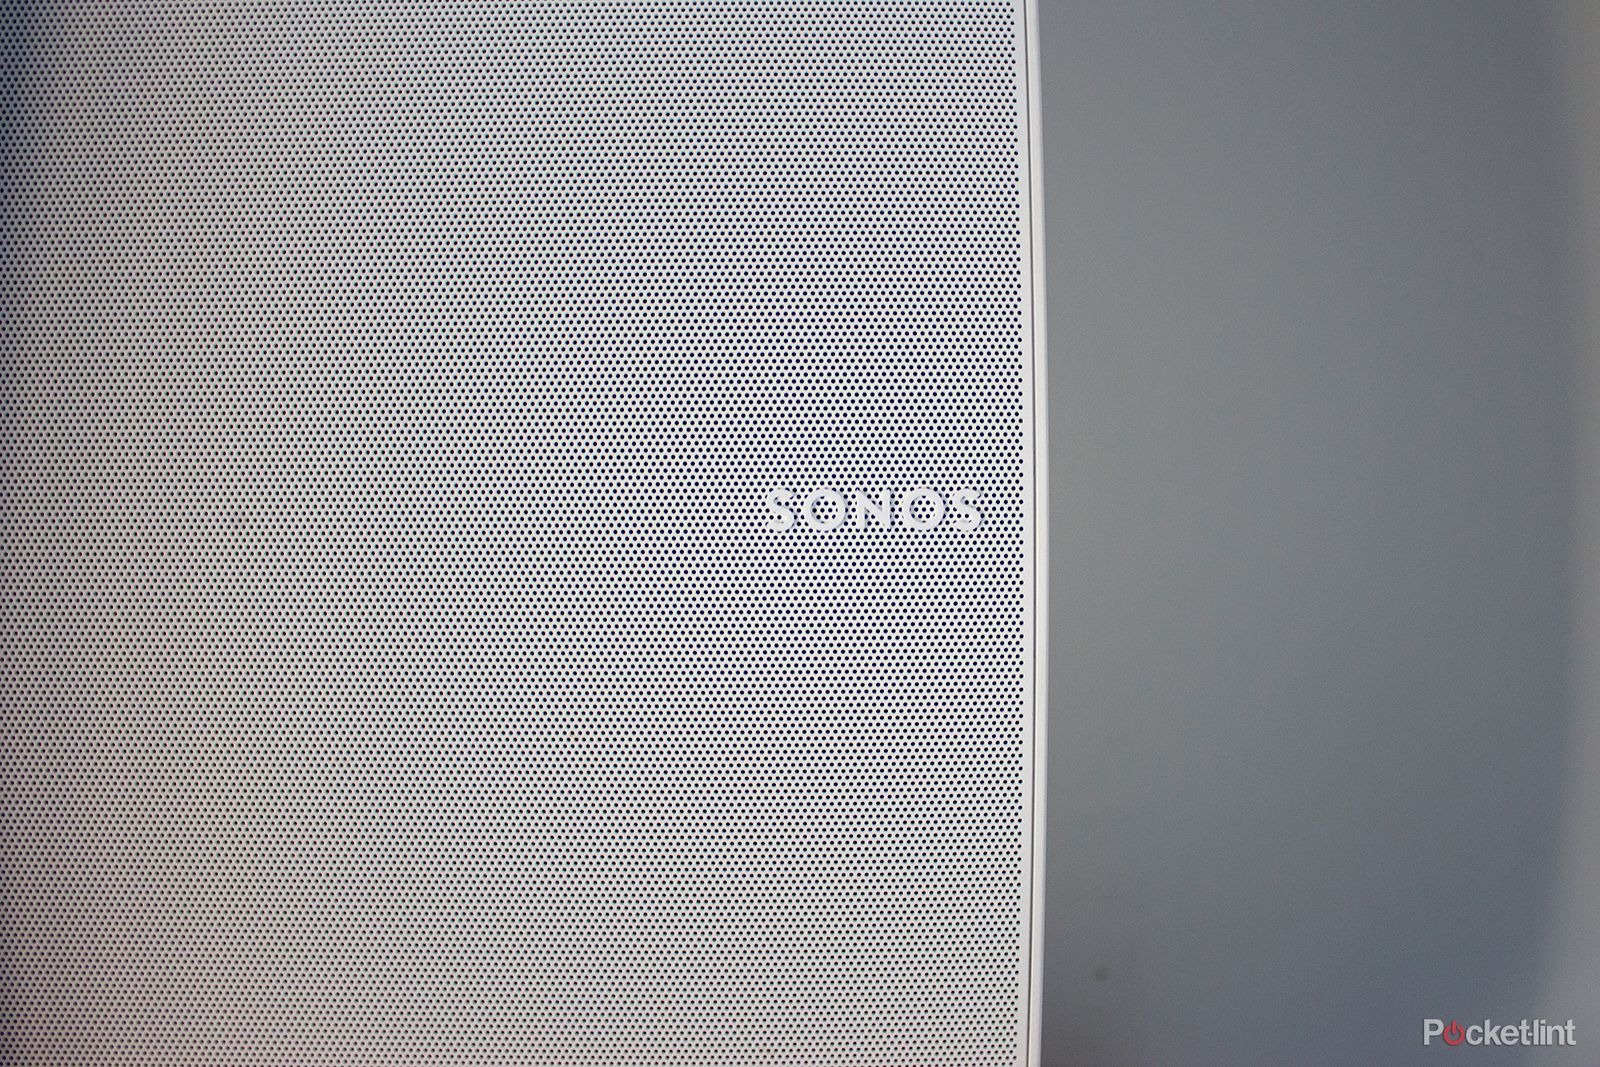 Is Sonos' latest acquisition more evidence it is working on headphones? photo 1